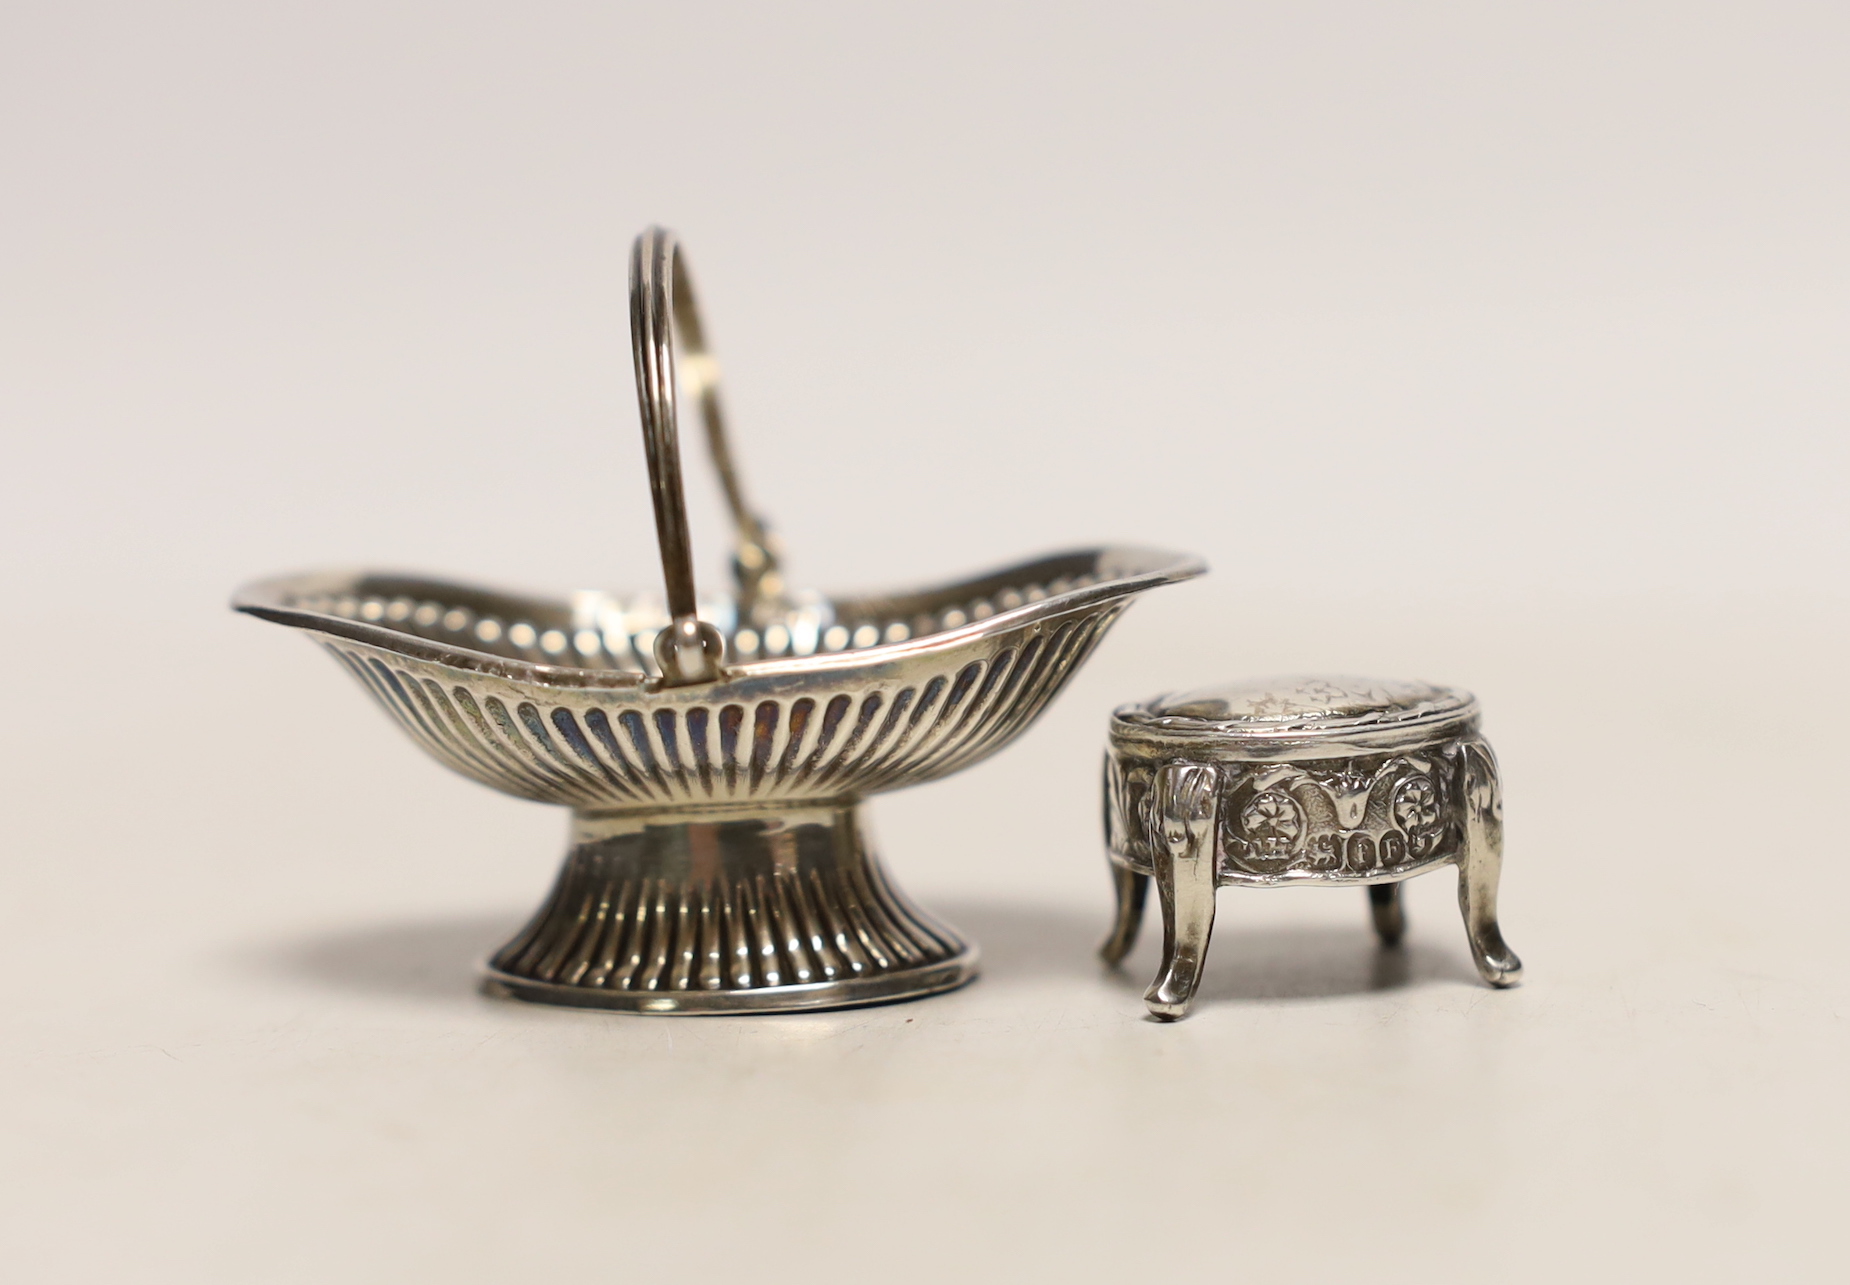 An Edwardian miniature silver model of a basket, by Levi & Salaman, Birmingham, 1907, 56mm, together with a miniature silver model of a table, import marks for London, 1901.